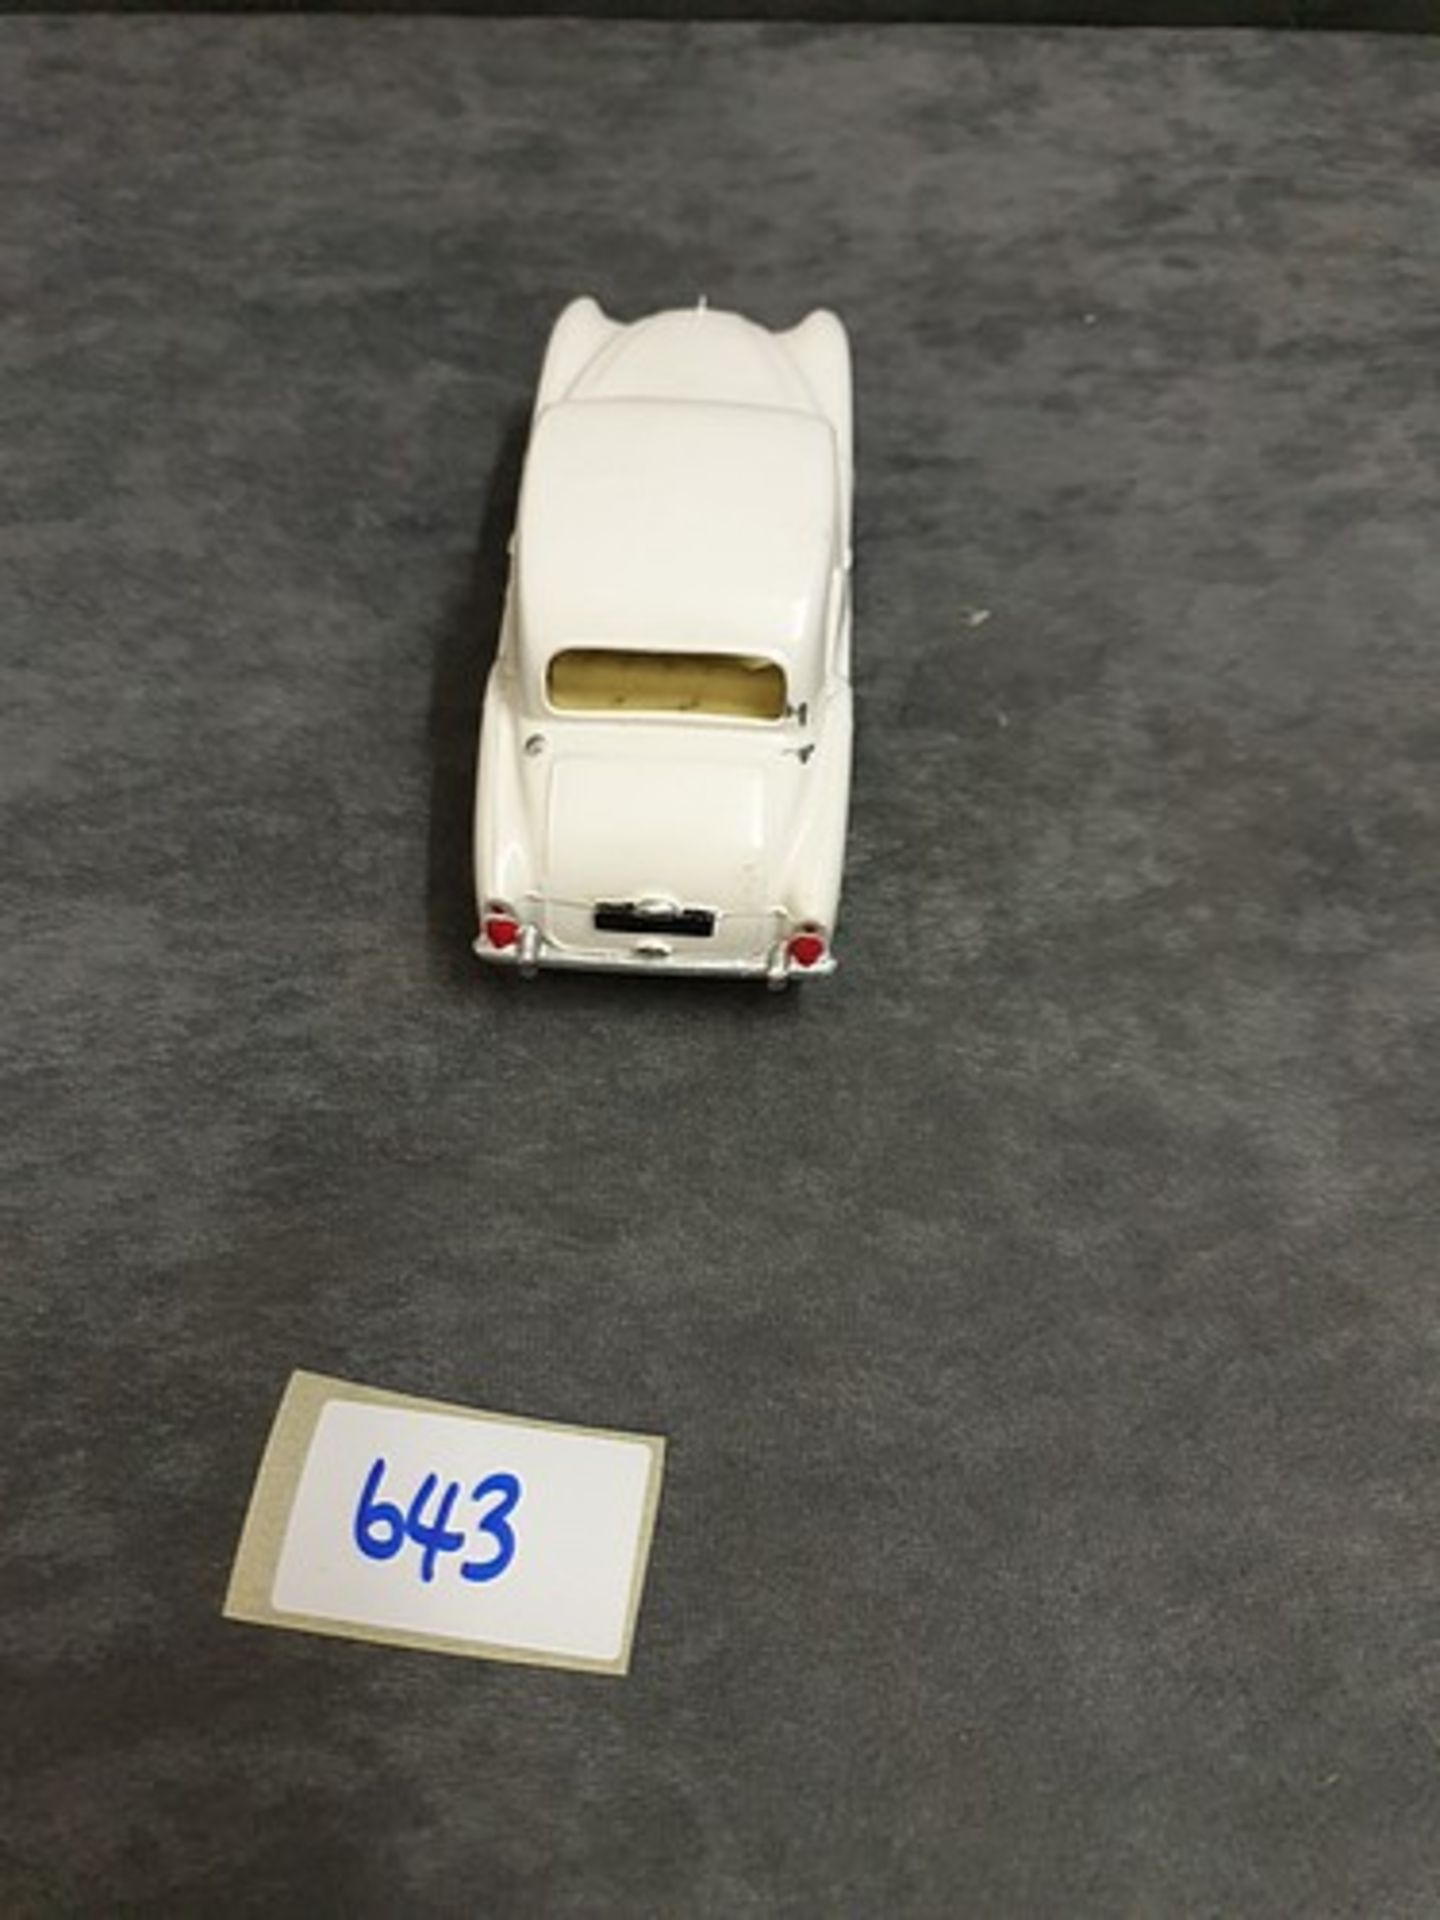 Spot-On By Tri-Ang Models Diecast #101 Armstrong Siddeley Sapphire In White And Cream Interior Model - Image 4 of 4